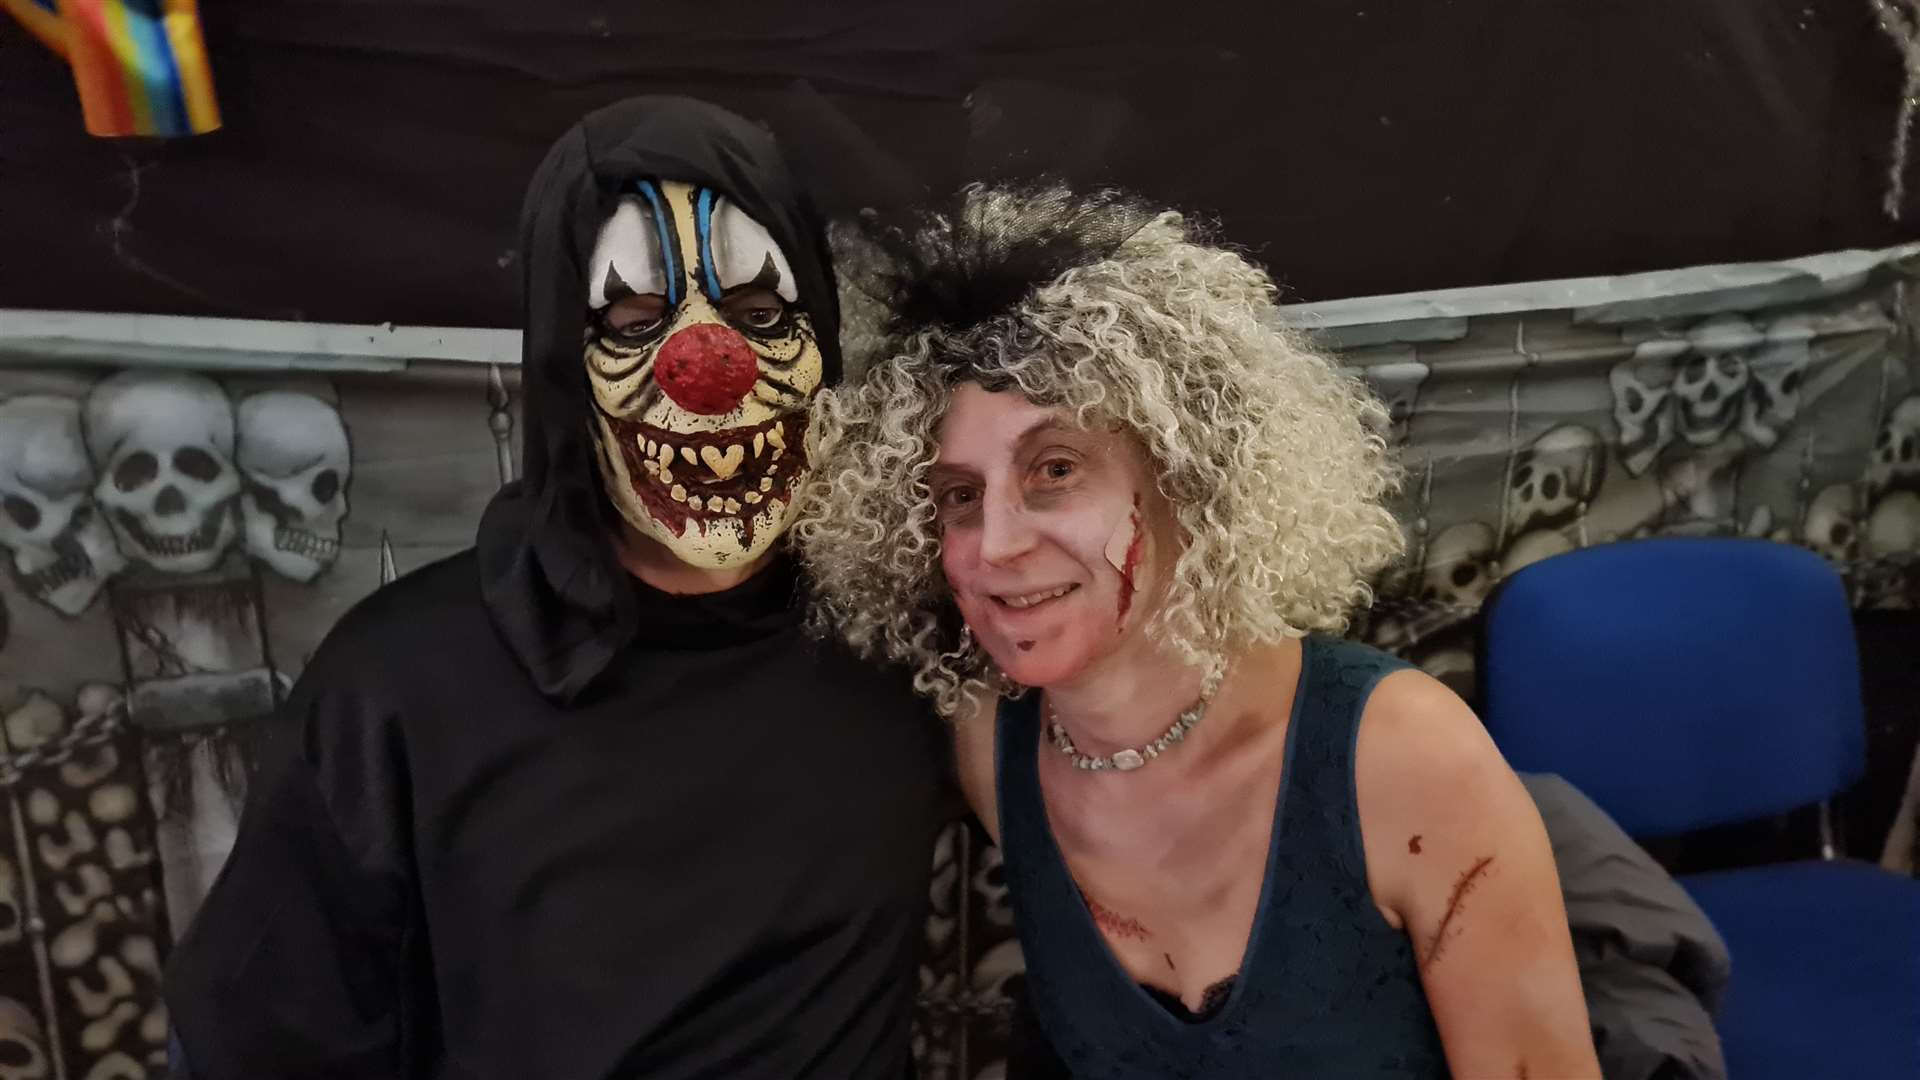 You wouldn't want to meet them on a dark night. Steve Holmes donned a monster face to go to the dance and Susan Holmes painted scars on her body.